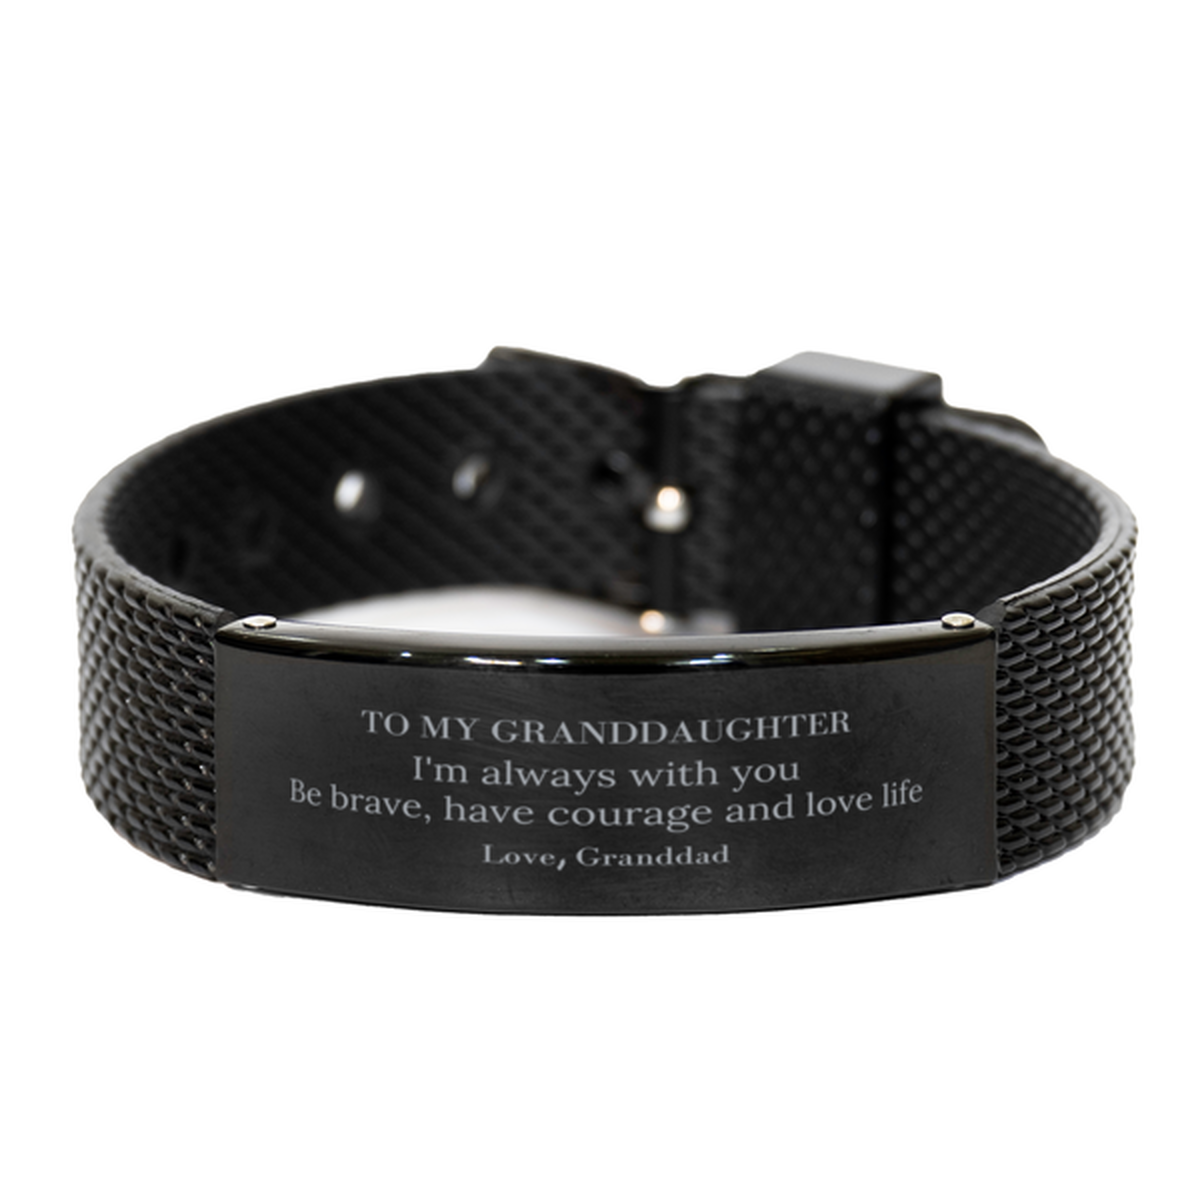 To My Granddaughter Gifts from Granddad, Unique Black Shark Mesh Bracelet Inspirational Christmas Birthday Graduation Gifts for Granddaughter I'm always with you. Be brave, have courage and love life. Love, Granddad